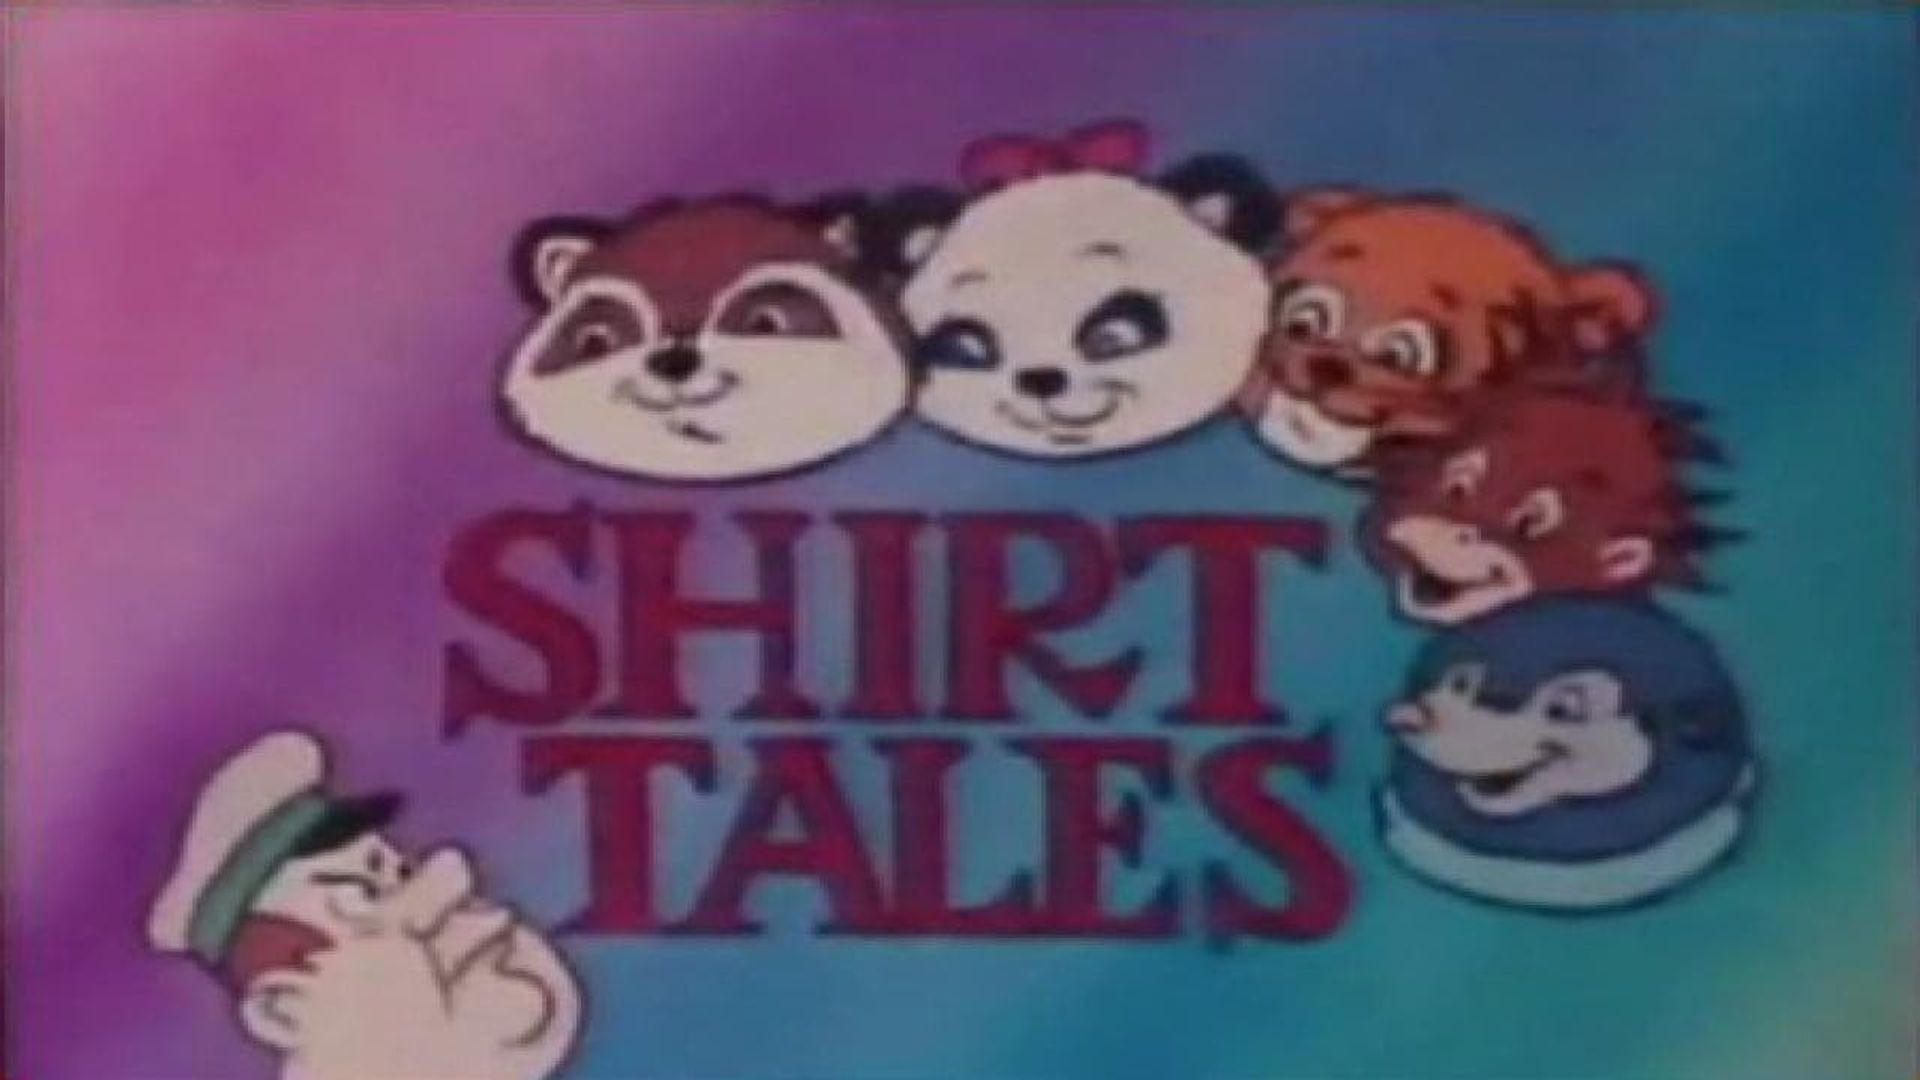 Shirt Tales background